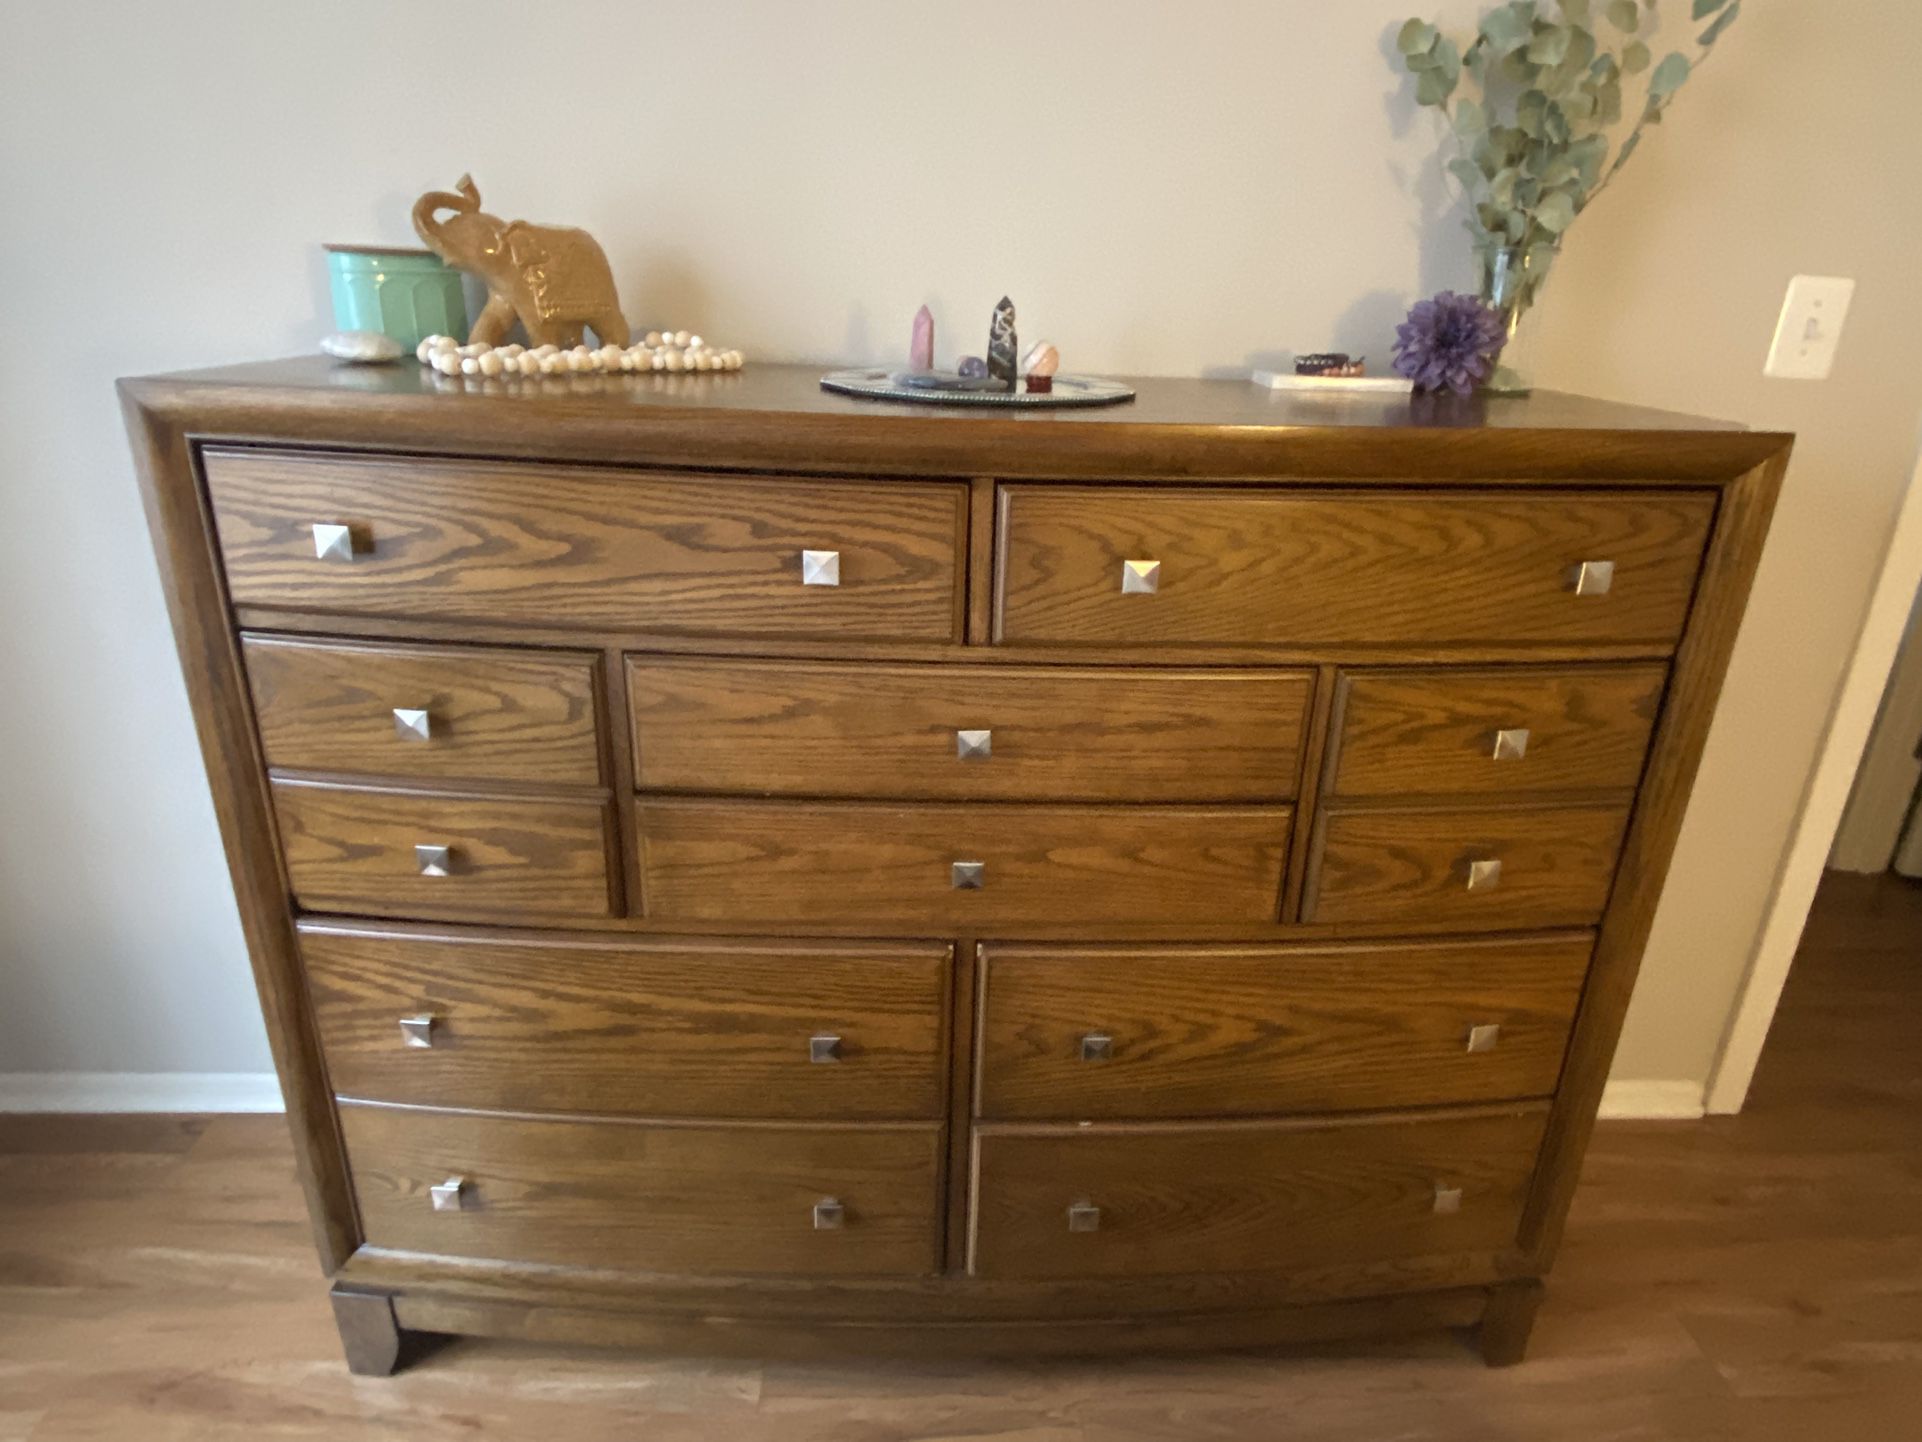 BROYHILL DRESSER AND NIGHTSTAND. MUST GO THIS WEEKEND!!!